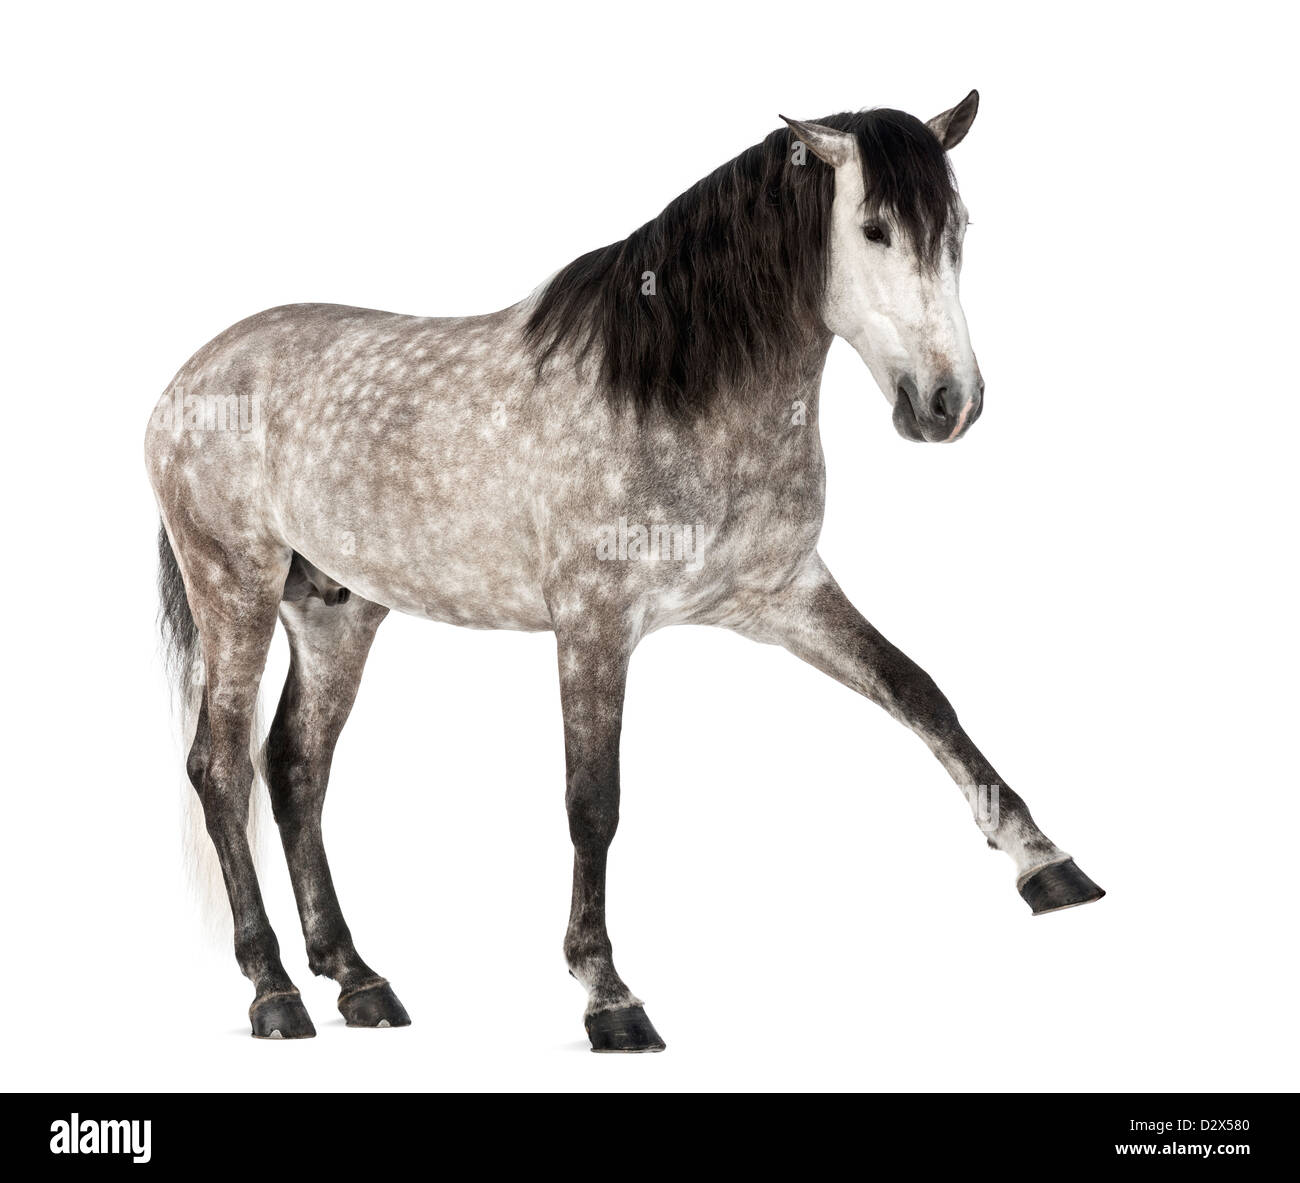 Andalusian raising leg, 7 years old, also known as the Pure Spanish Horse or PRE, against white background Stock Photo